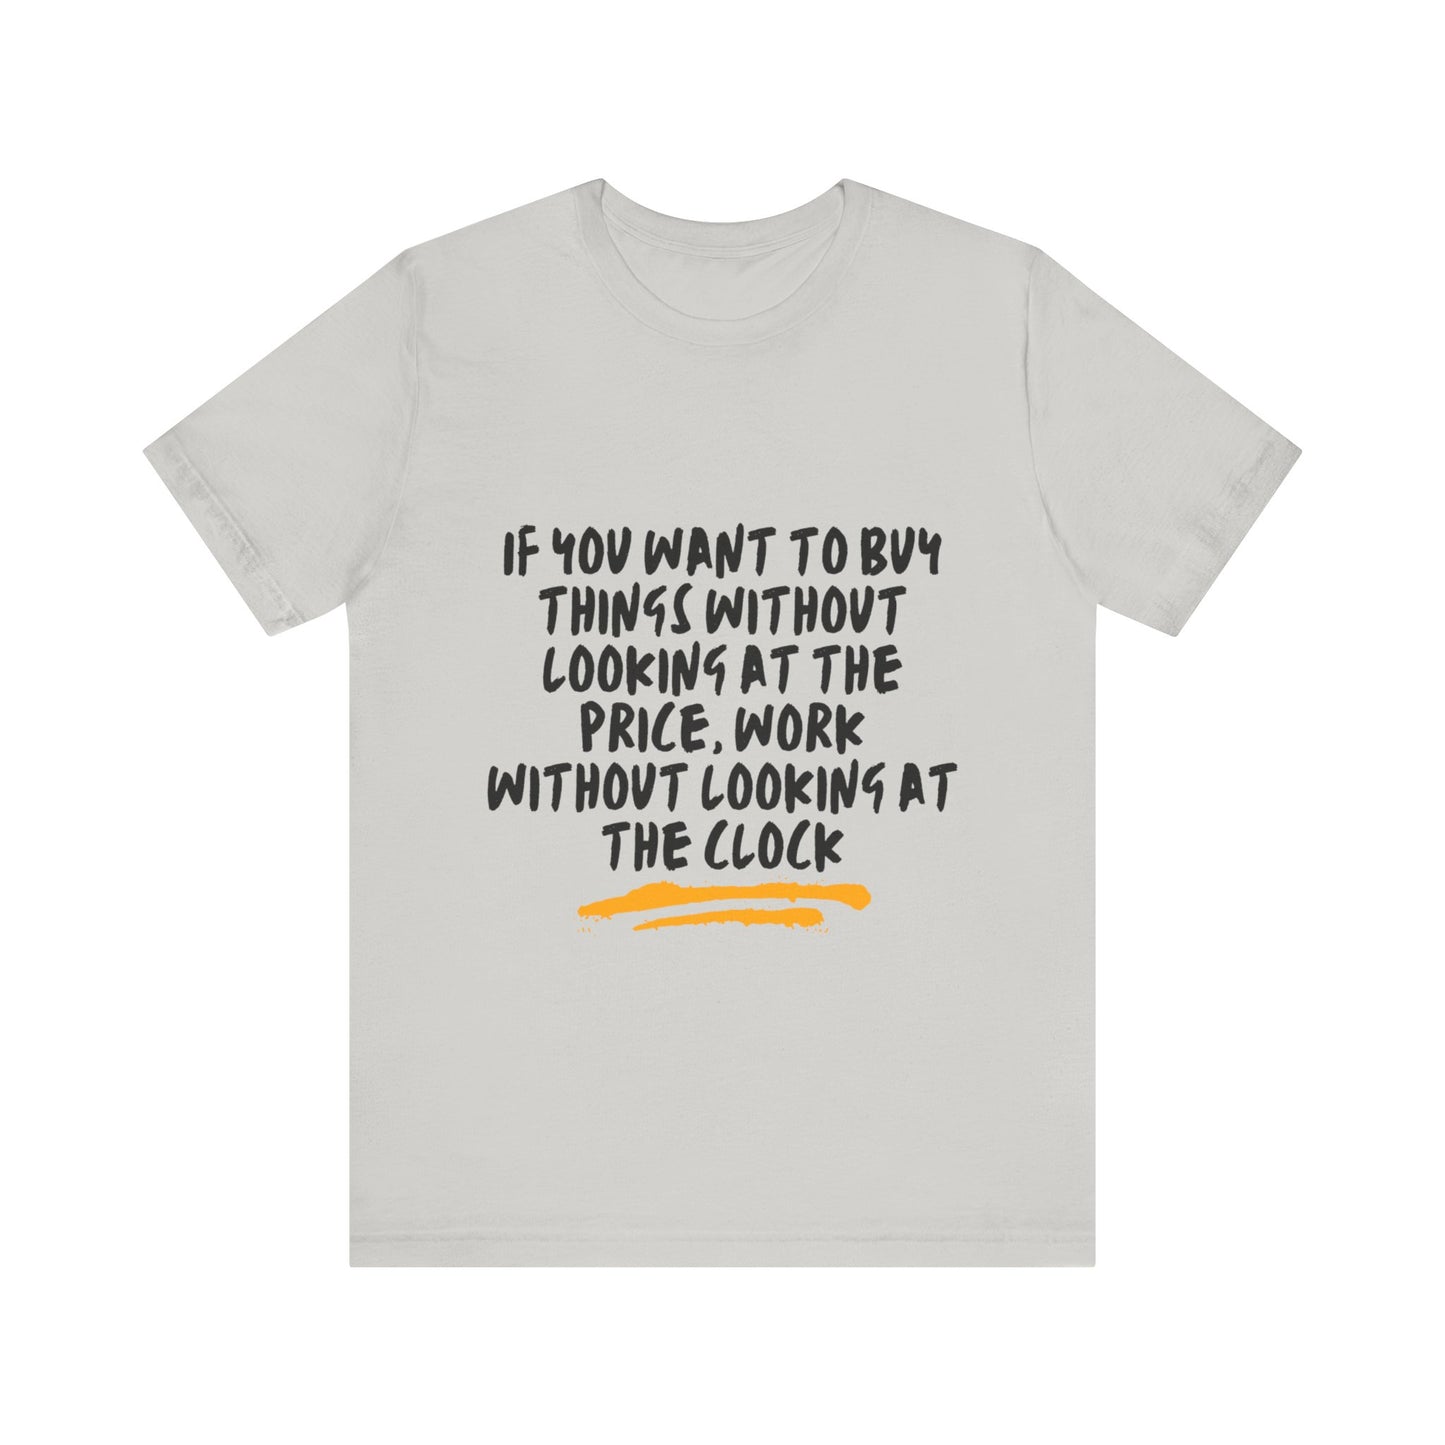 Work without looking at the clock T-shirt - Light Colors